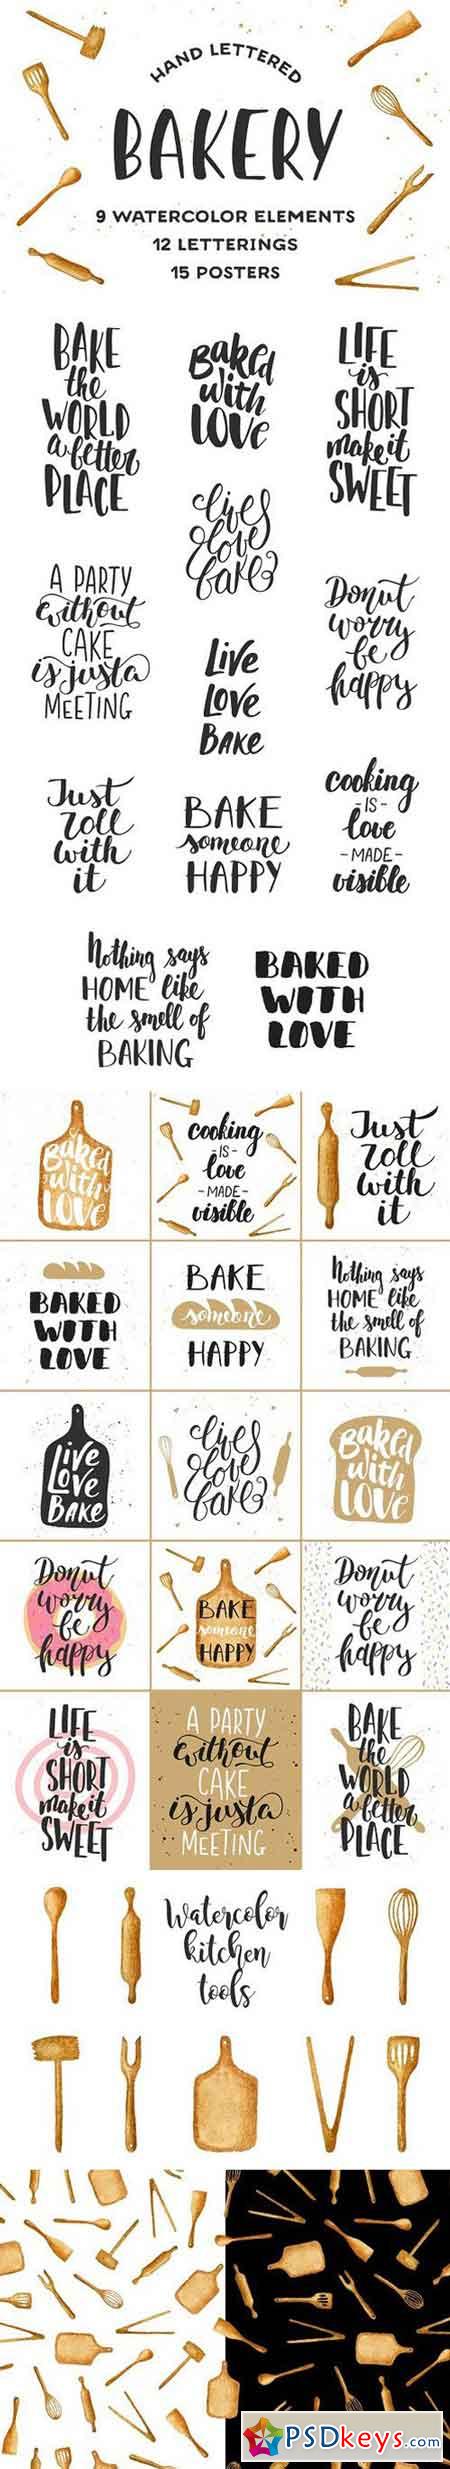 Bakery quotes and posters 1617673